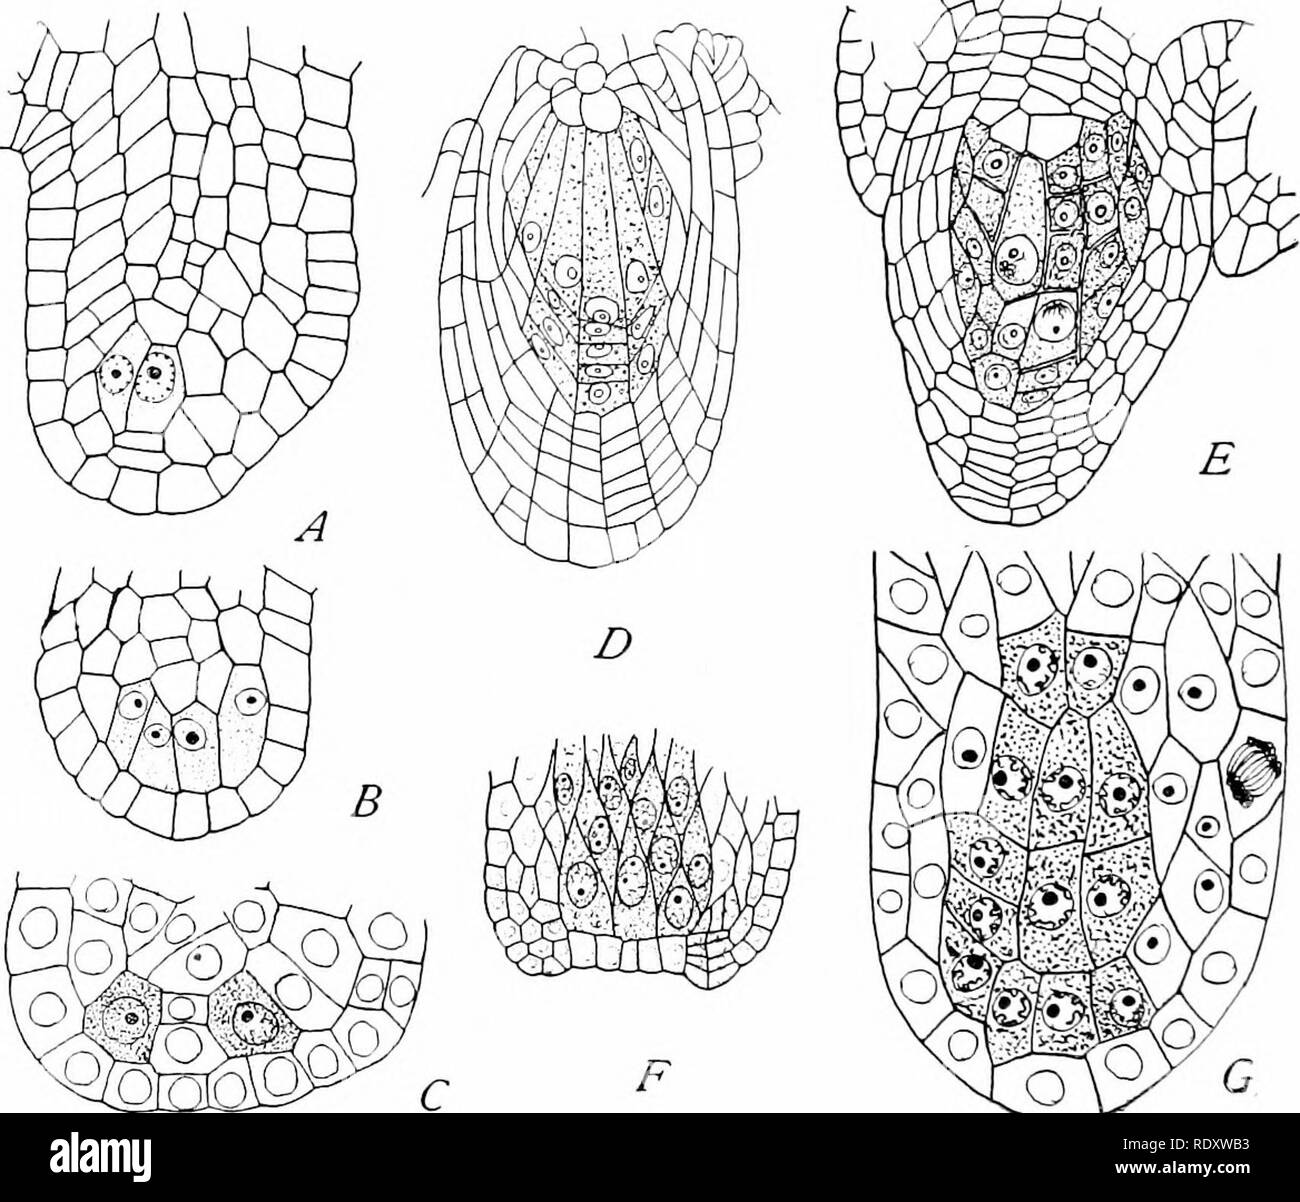 . Morphology of angiosperms (Morphology of spermatophytes. Part II). Angiosperms; Plant morphology. 58 MORPHOLOGY OF ANGIOSPKRMS mate. The prevailing habit, however, is to limit the arehe- sporium to the single hypodermal cell that terminates the axial row of the nucellus. This seems to have resulted in the more. Fig. 23.—Longitudinal sections of ovules showing multicellular arehesperia. A. B, Astilbe japonica, x 550; after Webb.™ C, tialix glaucophylla, x 600; after Cham- berlain.36 I&gt;, Bom, Uvida, x 224; after Strasboeoek.is £,, Alchemilla alpina, x 275; after Murbeok.&quot; F, Callipelti Stock Photo